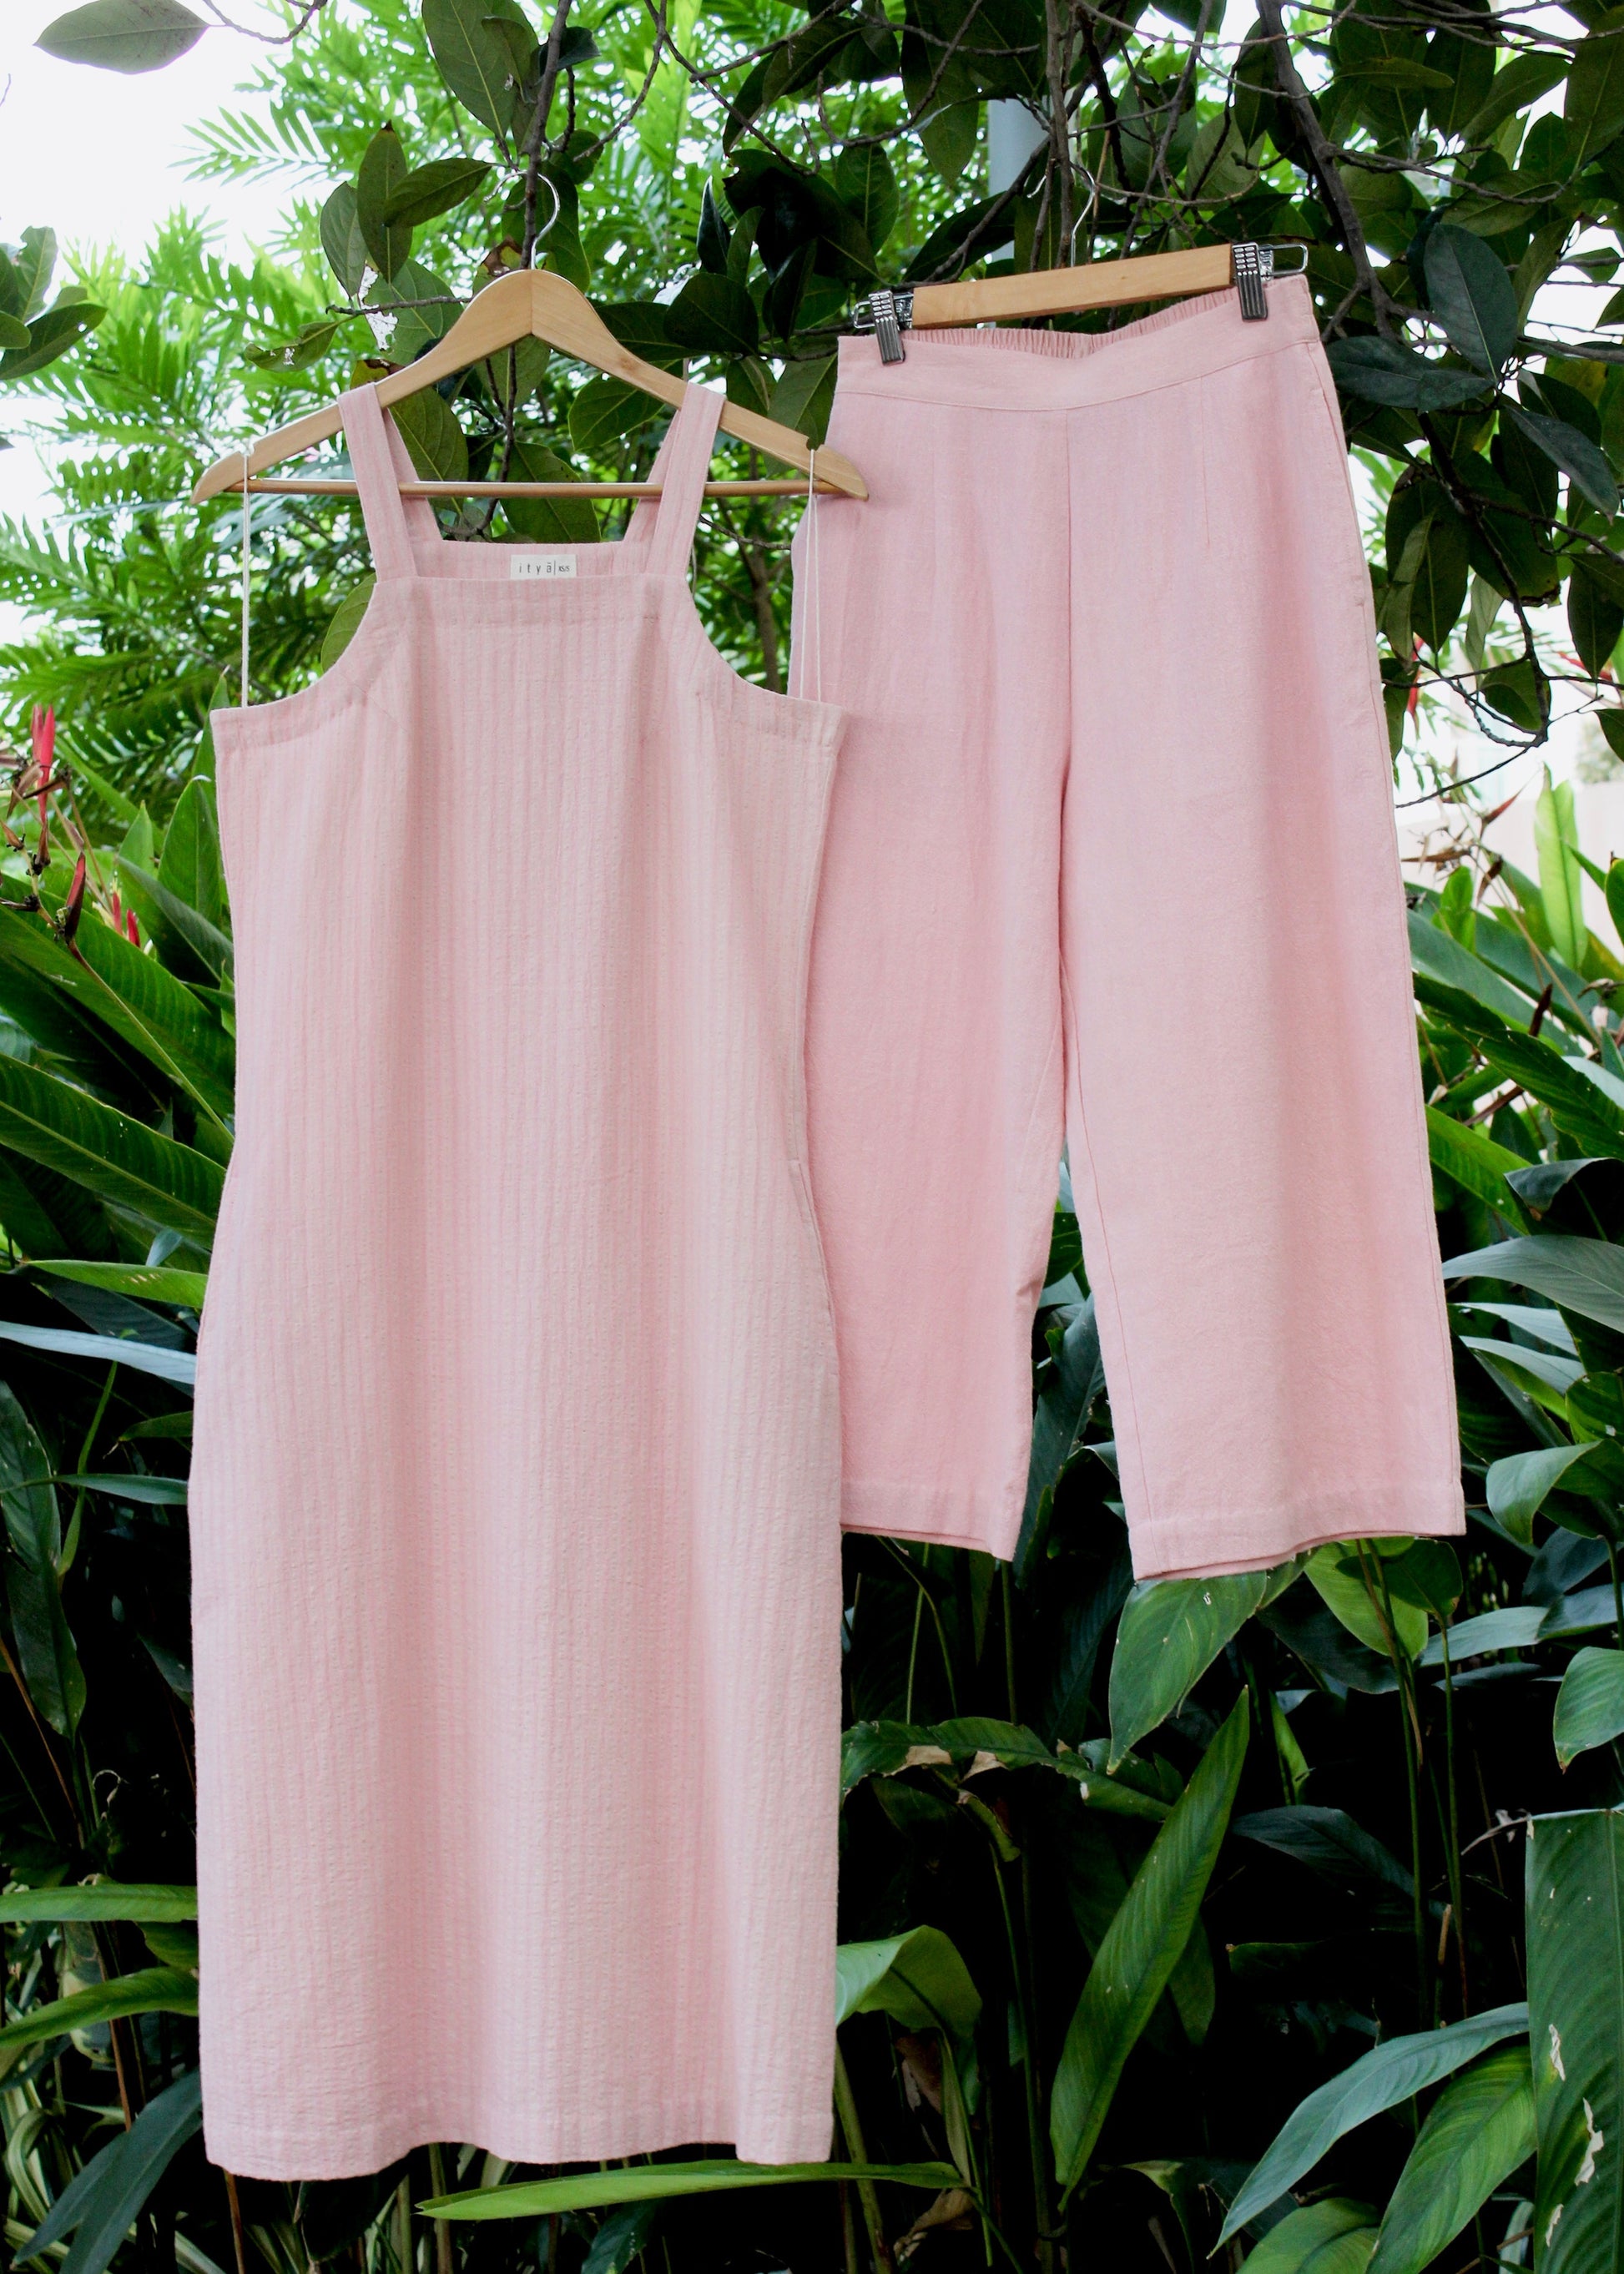 Tulip Top and Blush Pants by Itya with Casual Wear, Co-ord Sets, Hand Spun Cotton, Handwoven cotton, Natural, Office, Office Wear Co-ords, Pastel Perfect, Pastel Perfect by Itya, Pink, Plant Dye, Relaxed Fit, SS22, Textured, Womenswear at Kamakhyaa for sustainable fashion